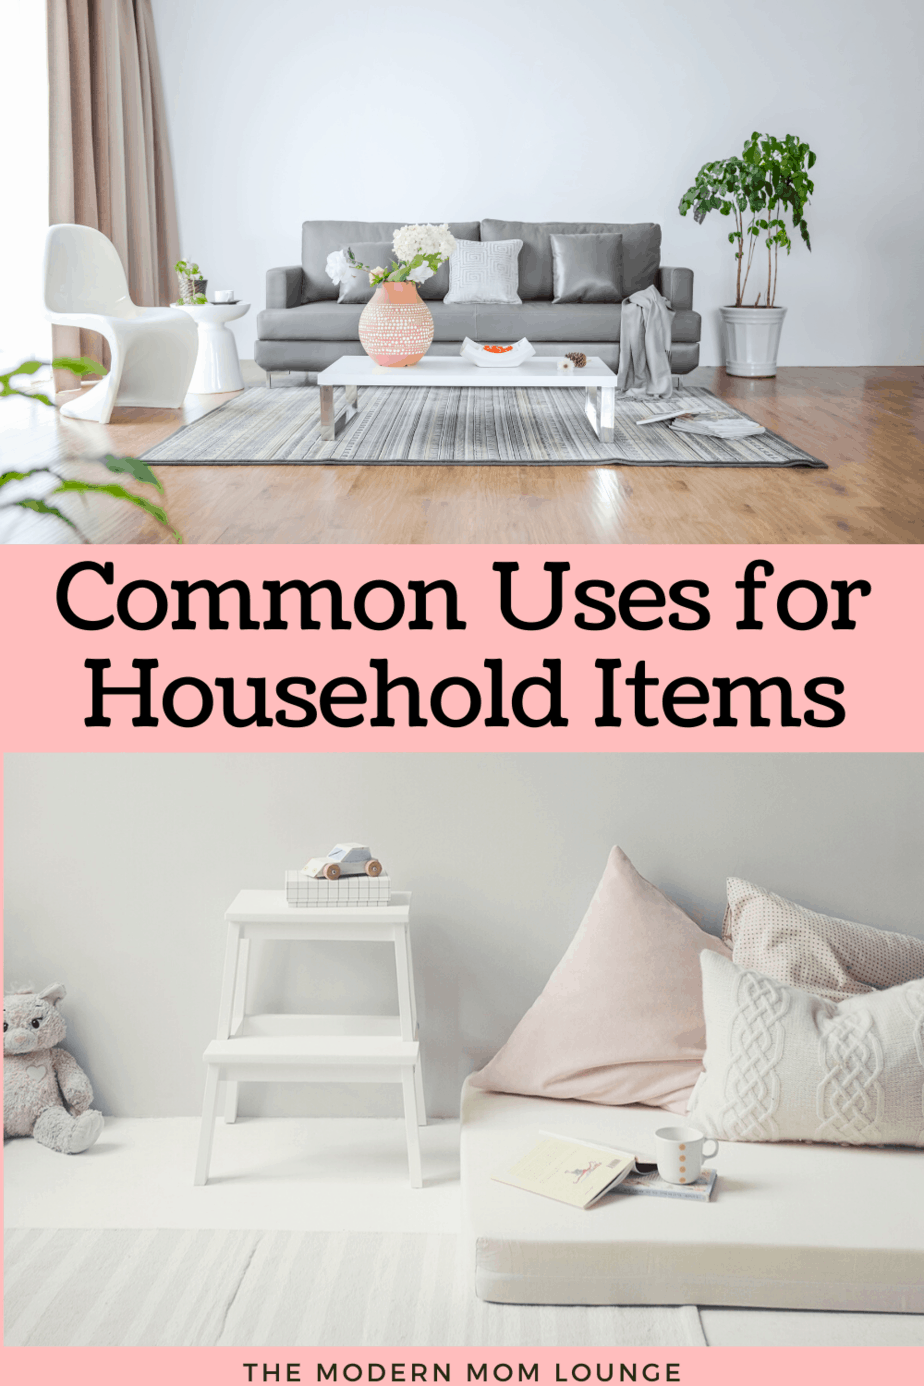 7 New Uses for Common Household Items